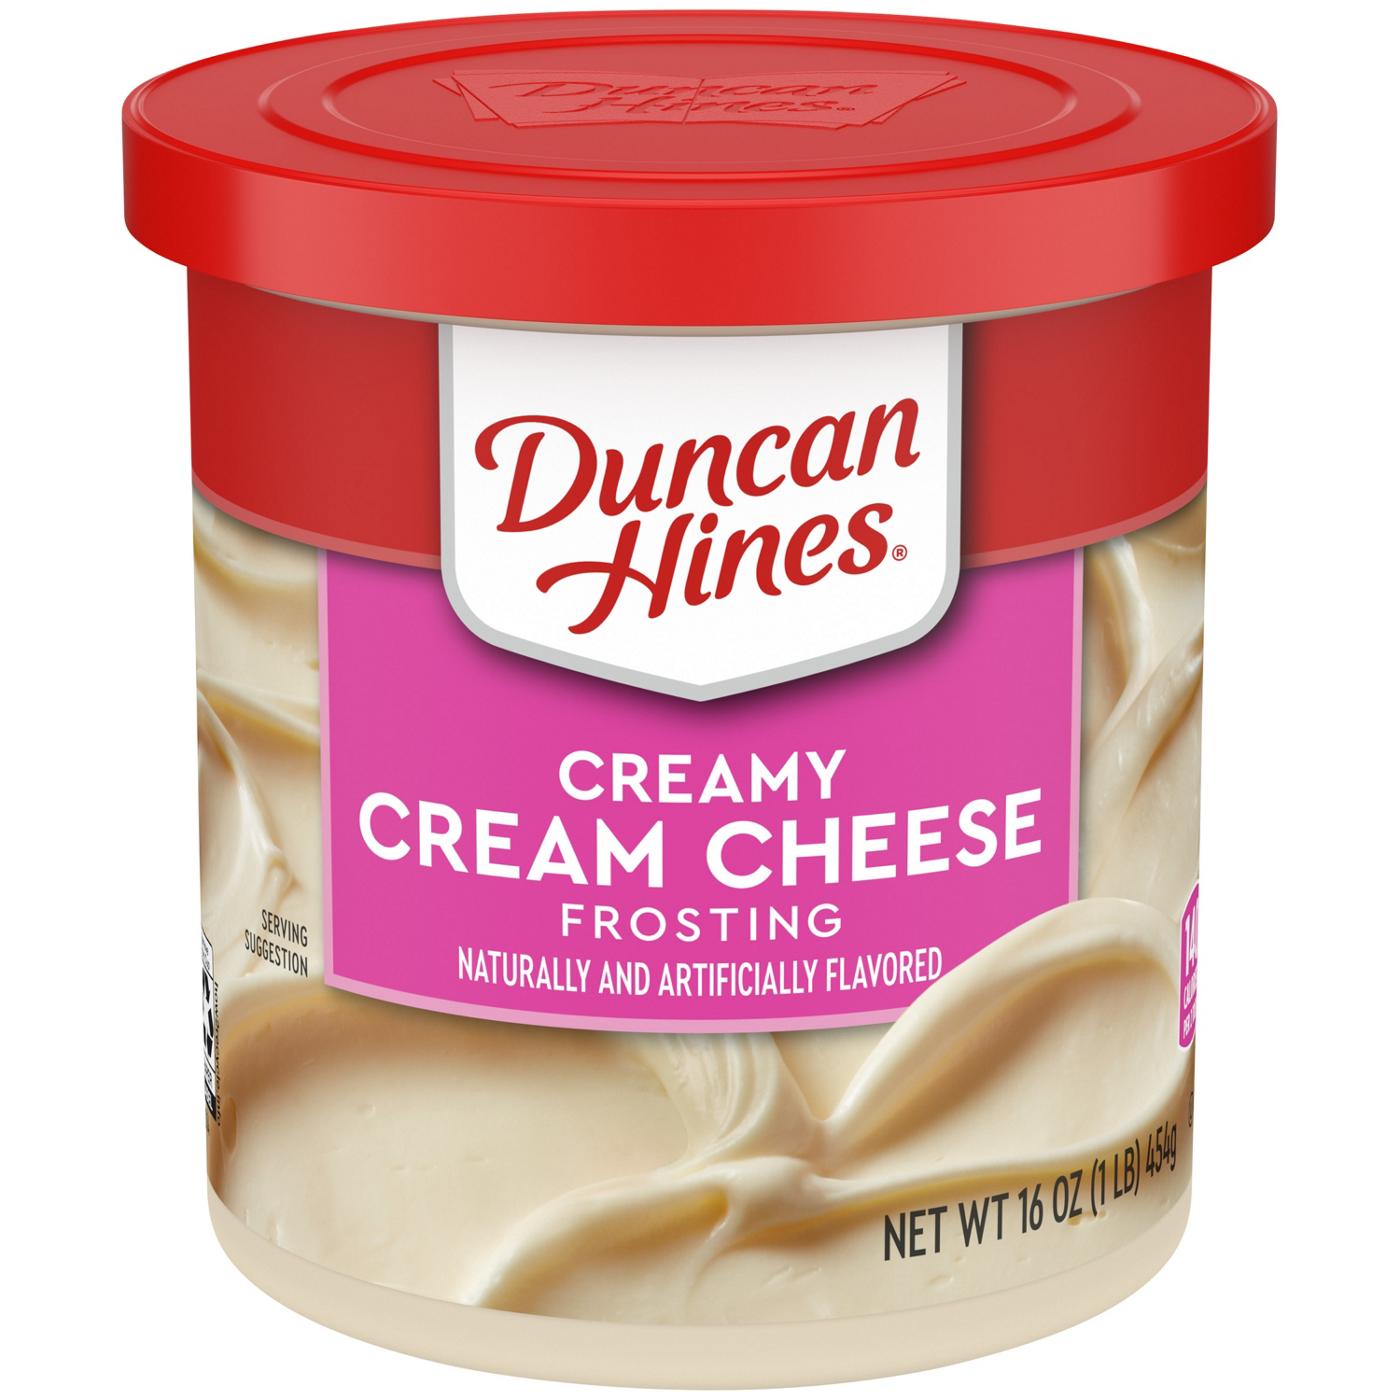 Duncan Hines Creamy Cream Cheese Frosting; image 1 of 4